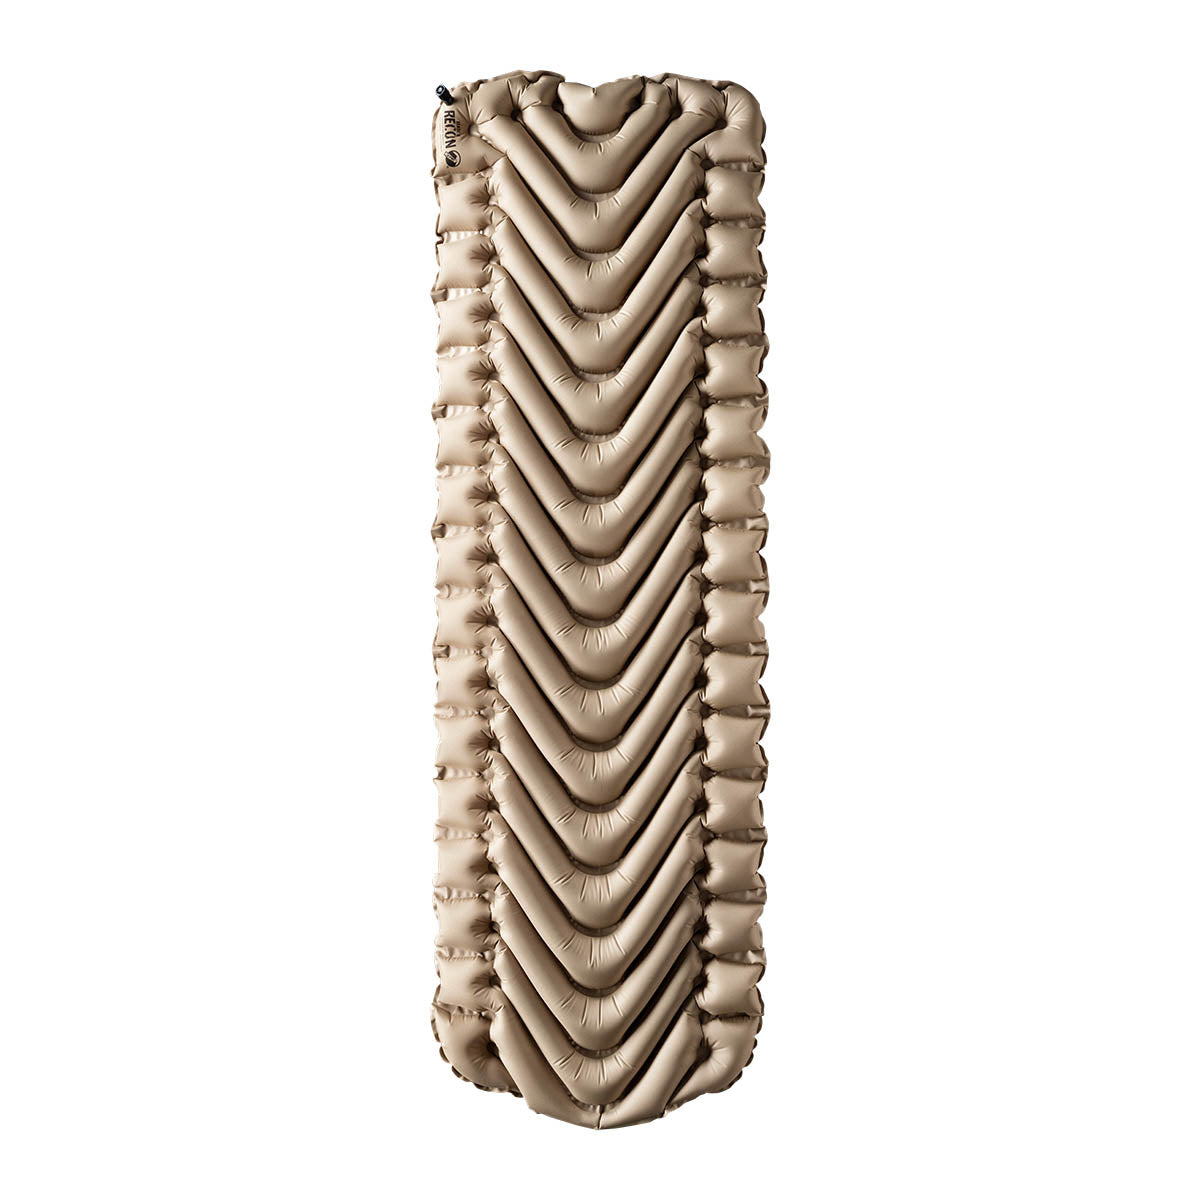 A rectangular tan inflatable sleeping pad with v shaped pattern shown face on.